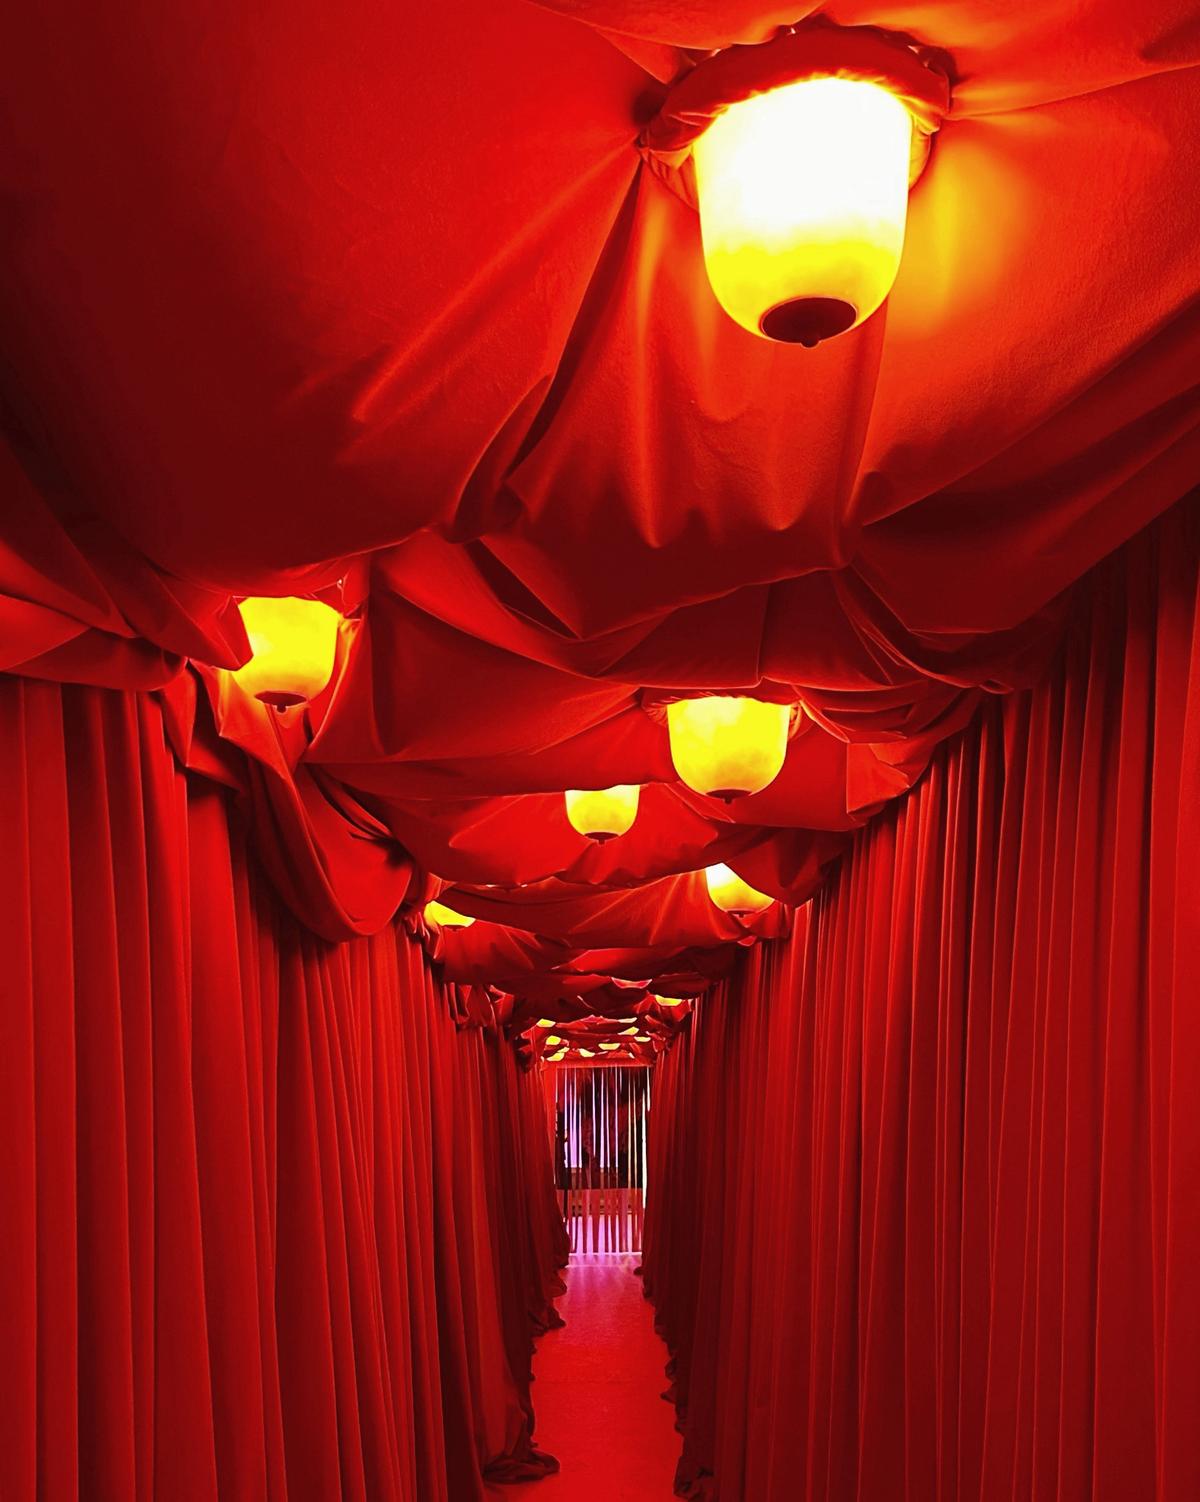 Booby Trap, an installation by Buchanan Studio featuring a hallway draped in thick velvet—and a ceiling featuring 35 “breast lights”—welcomes visitors to the Breasts exhibition at Palazzo ACP Franchetti